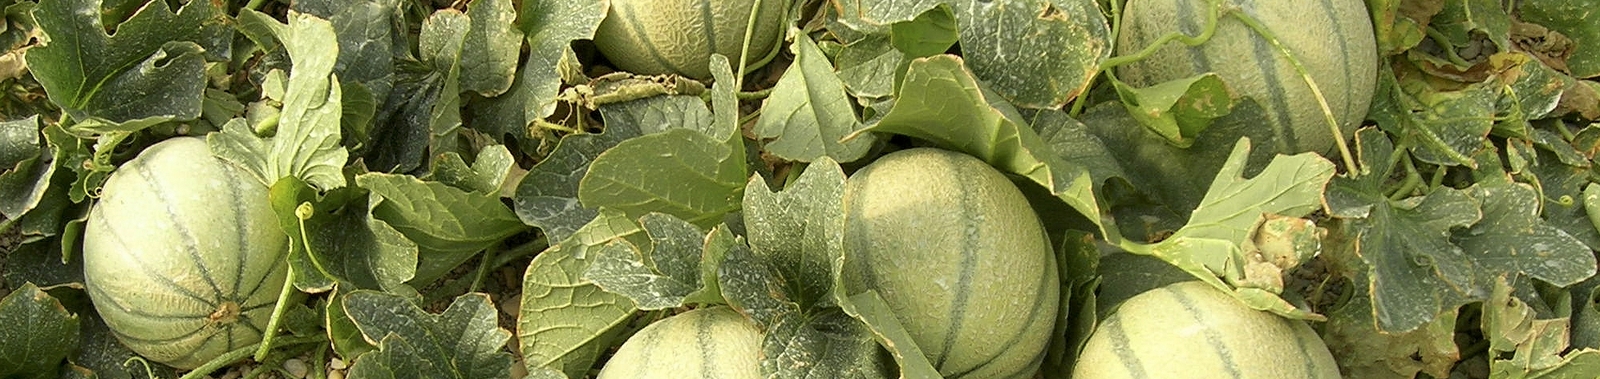 Role of Nutrients by Melon Growth Stage